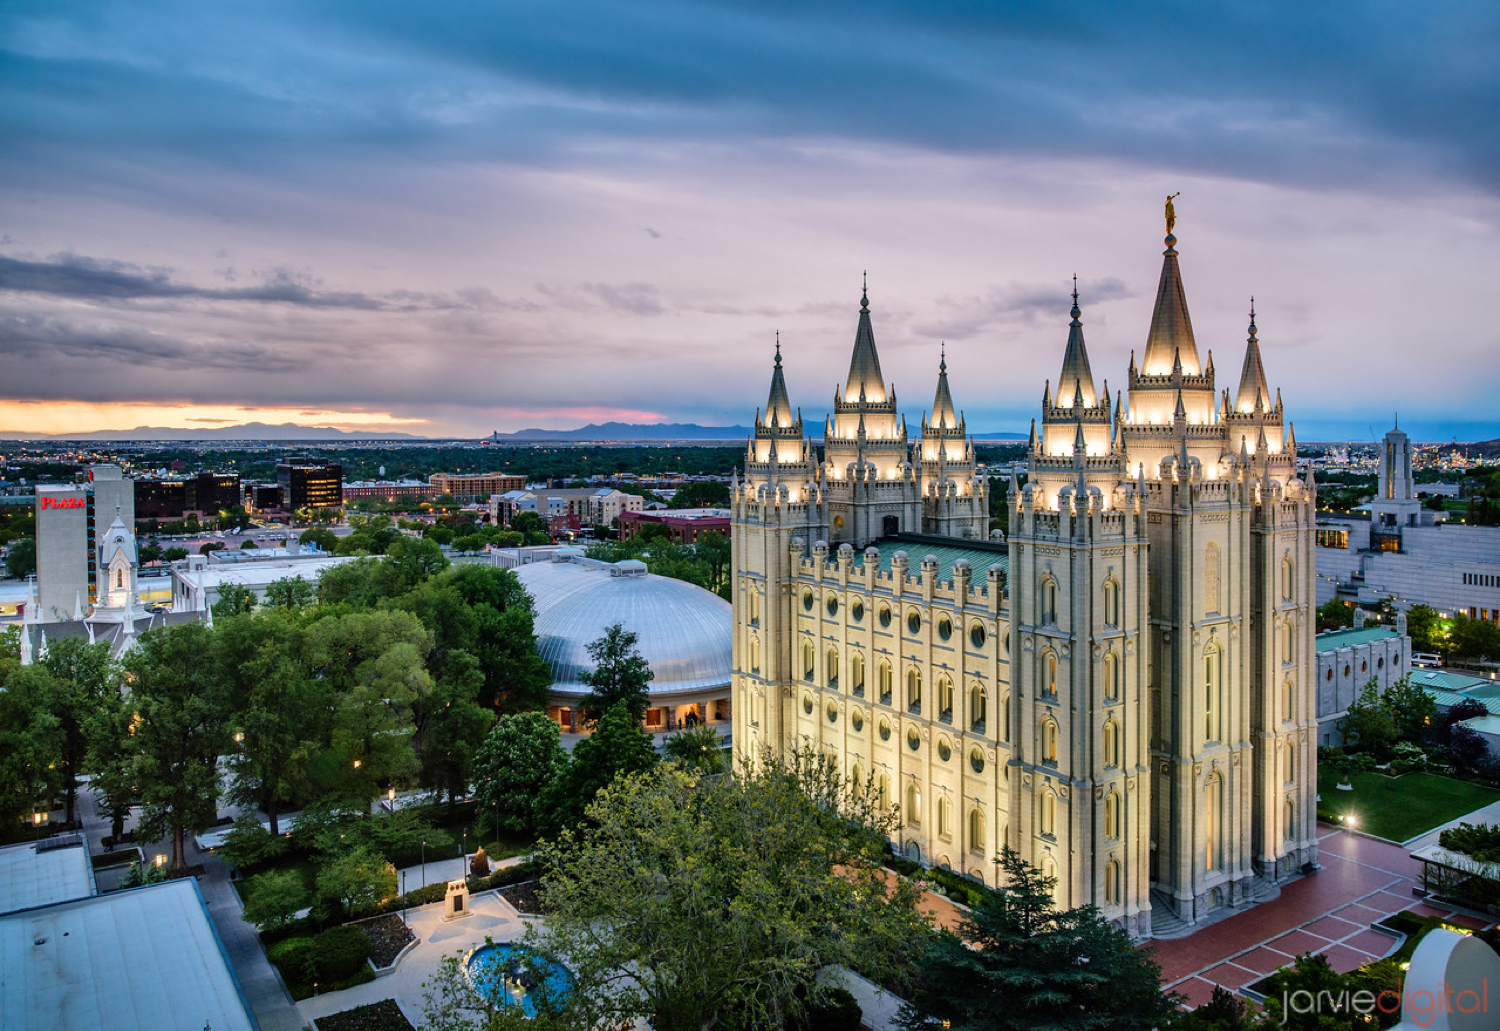 Share Your Temple Square Story